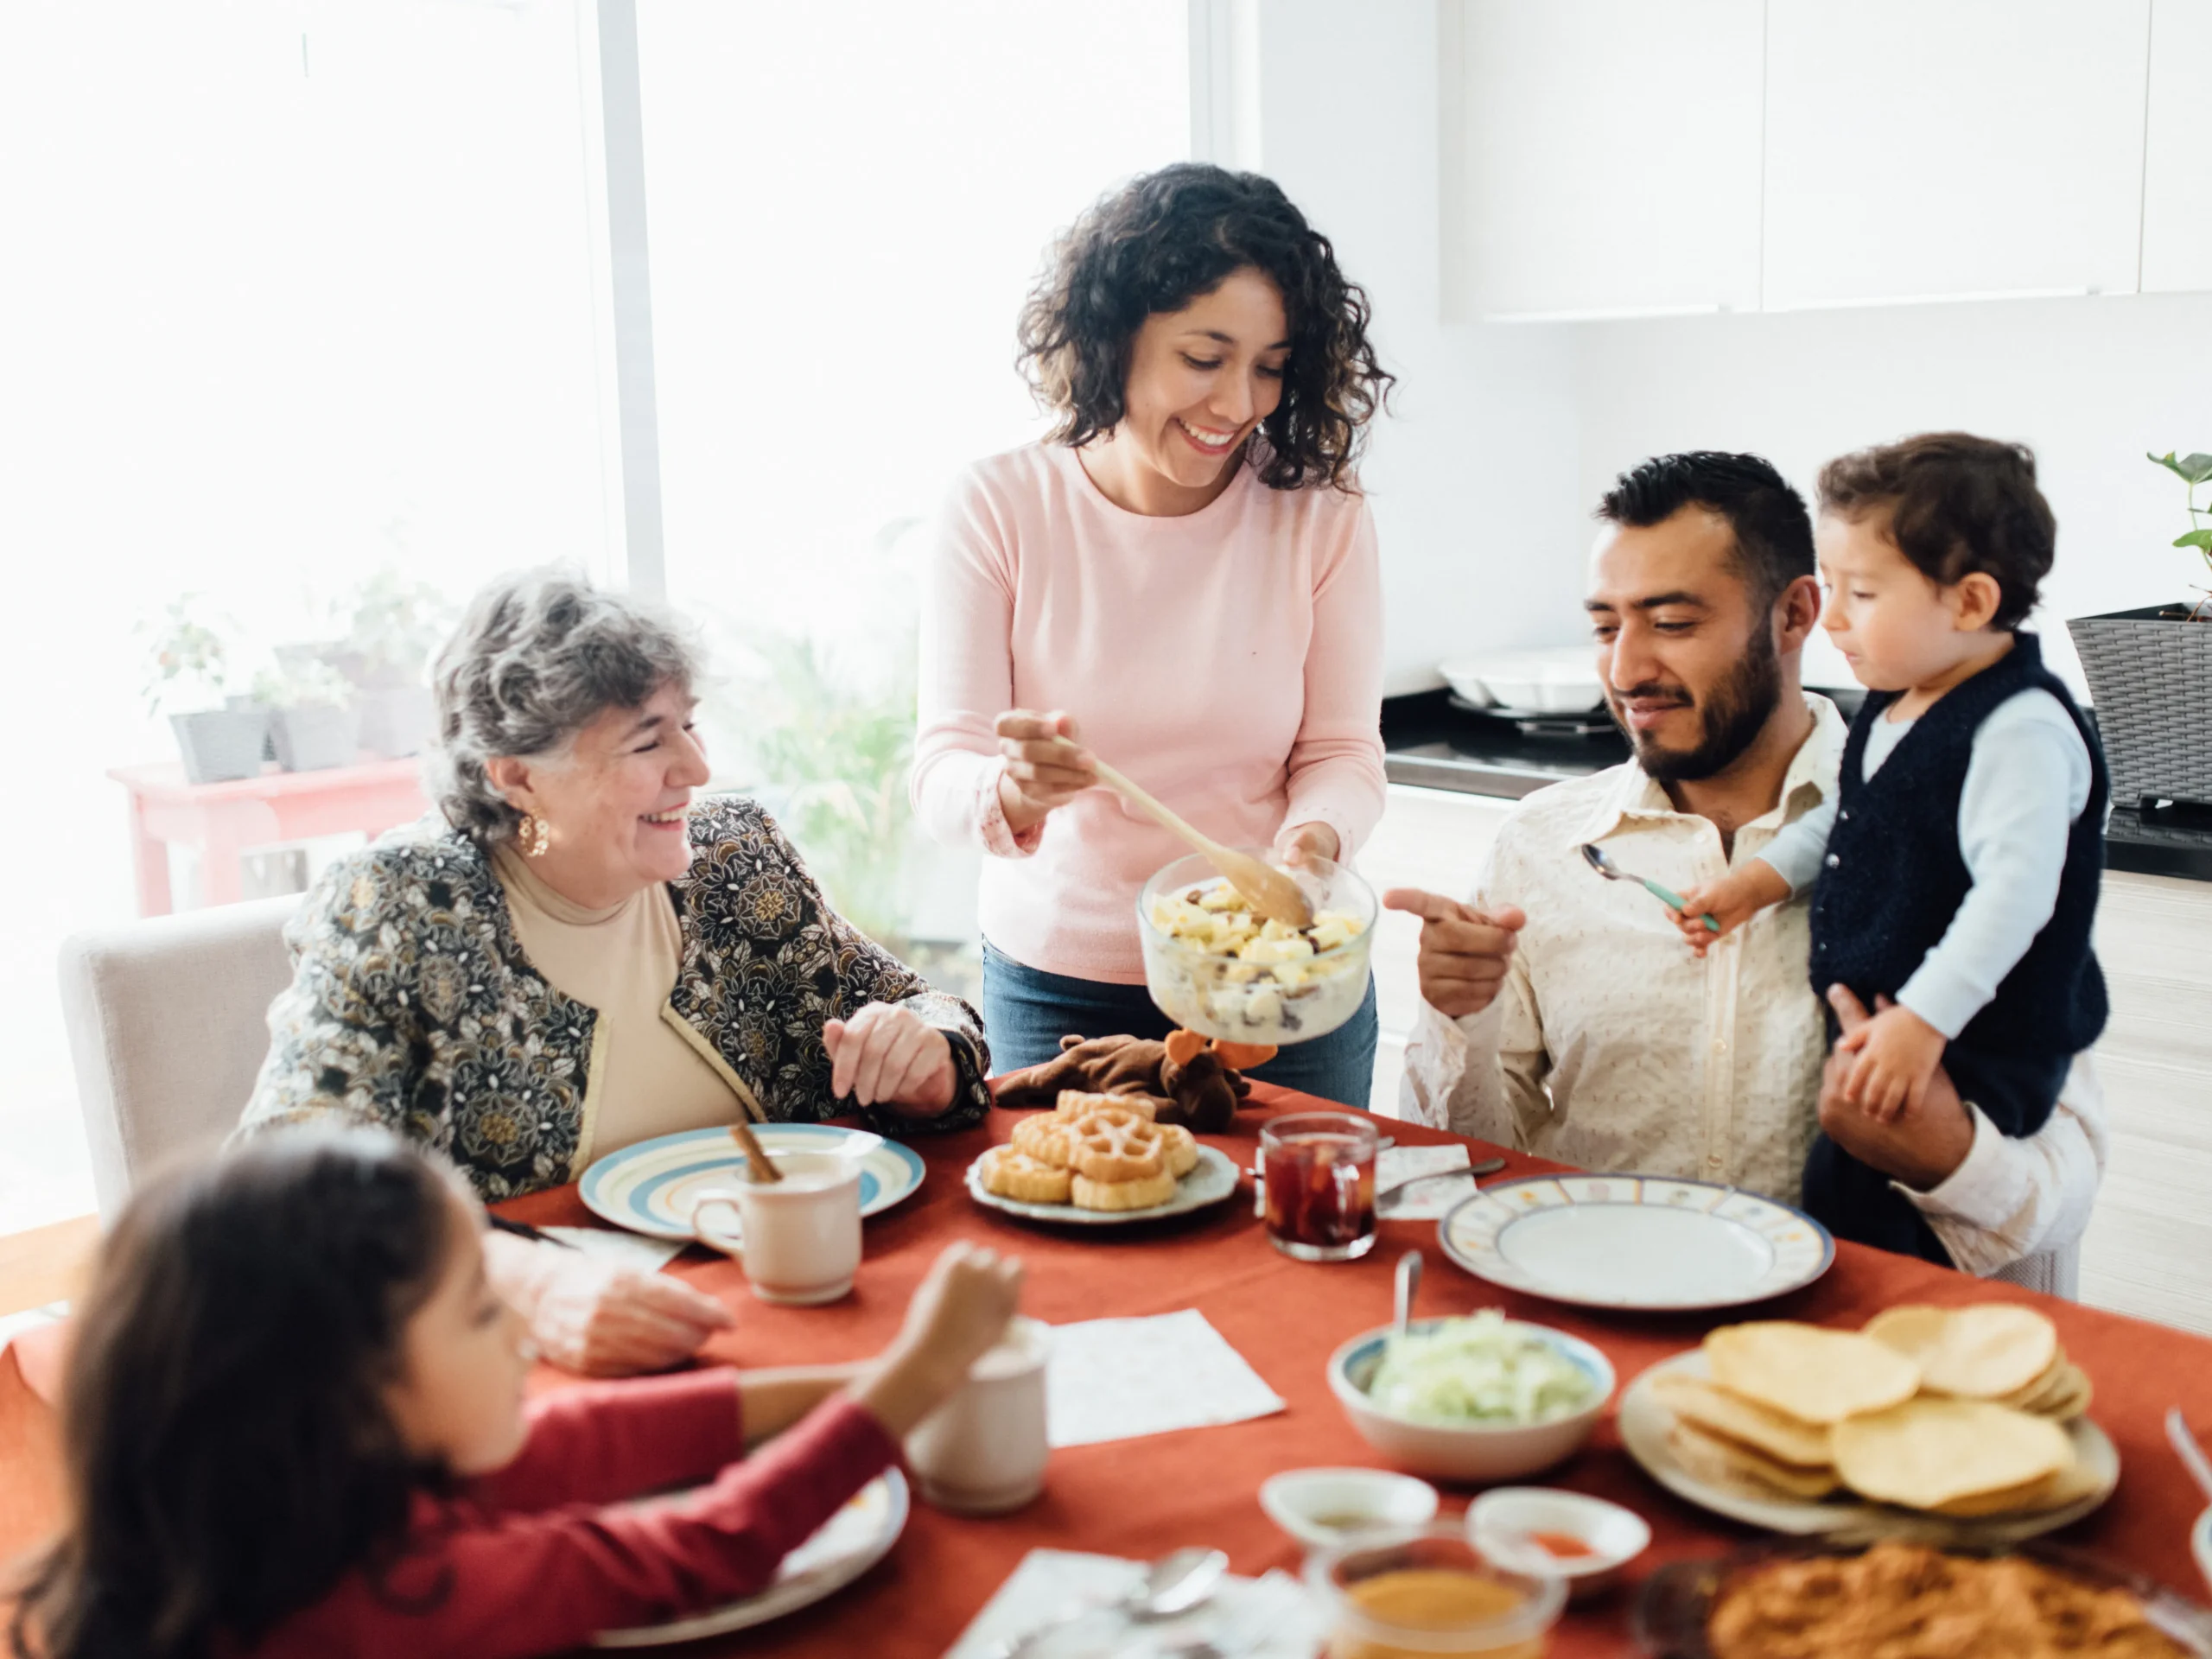 Elderly woman enjoying a meal with her family to motivate healthy eating habits for seniors